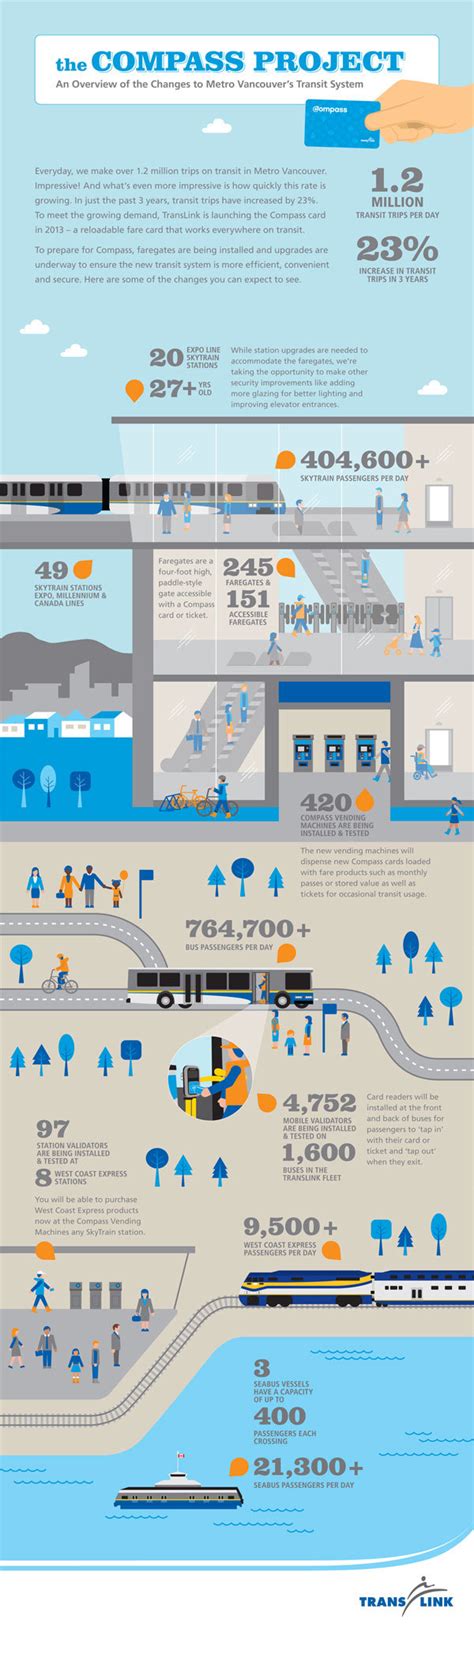 Translink Compass Project Infographic By Lina Zhao Via Behance